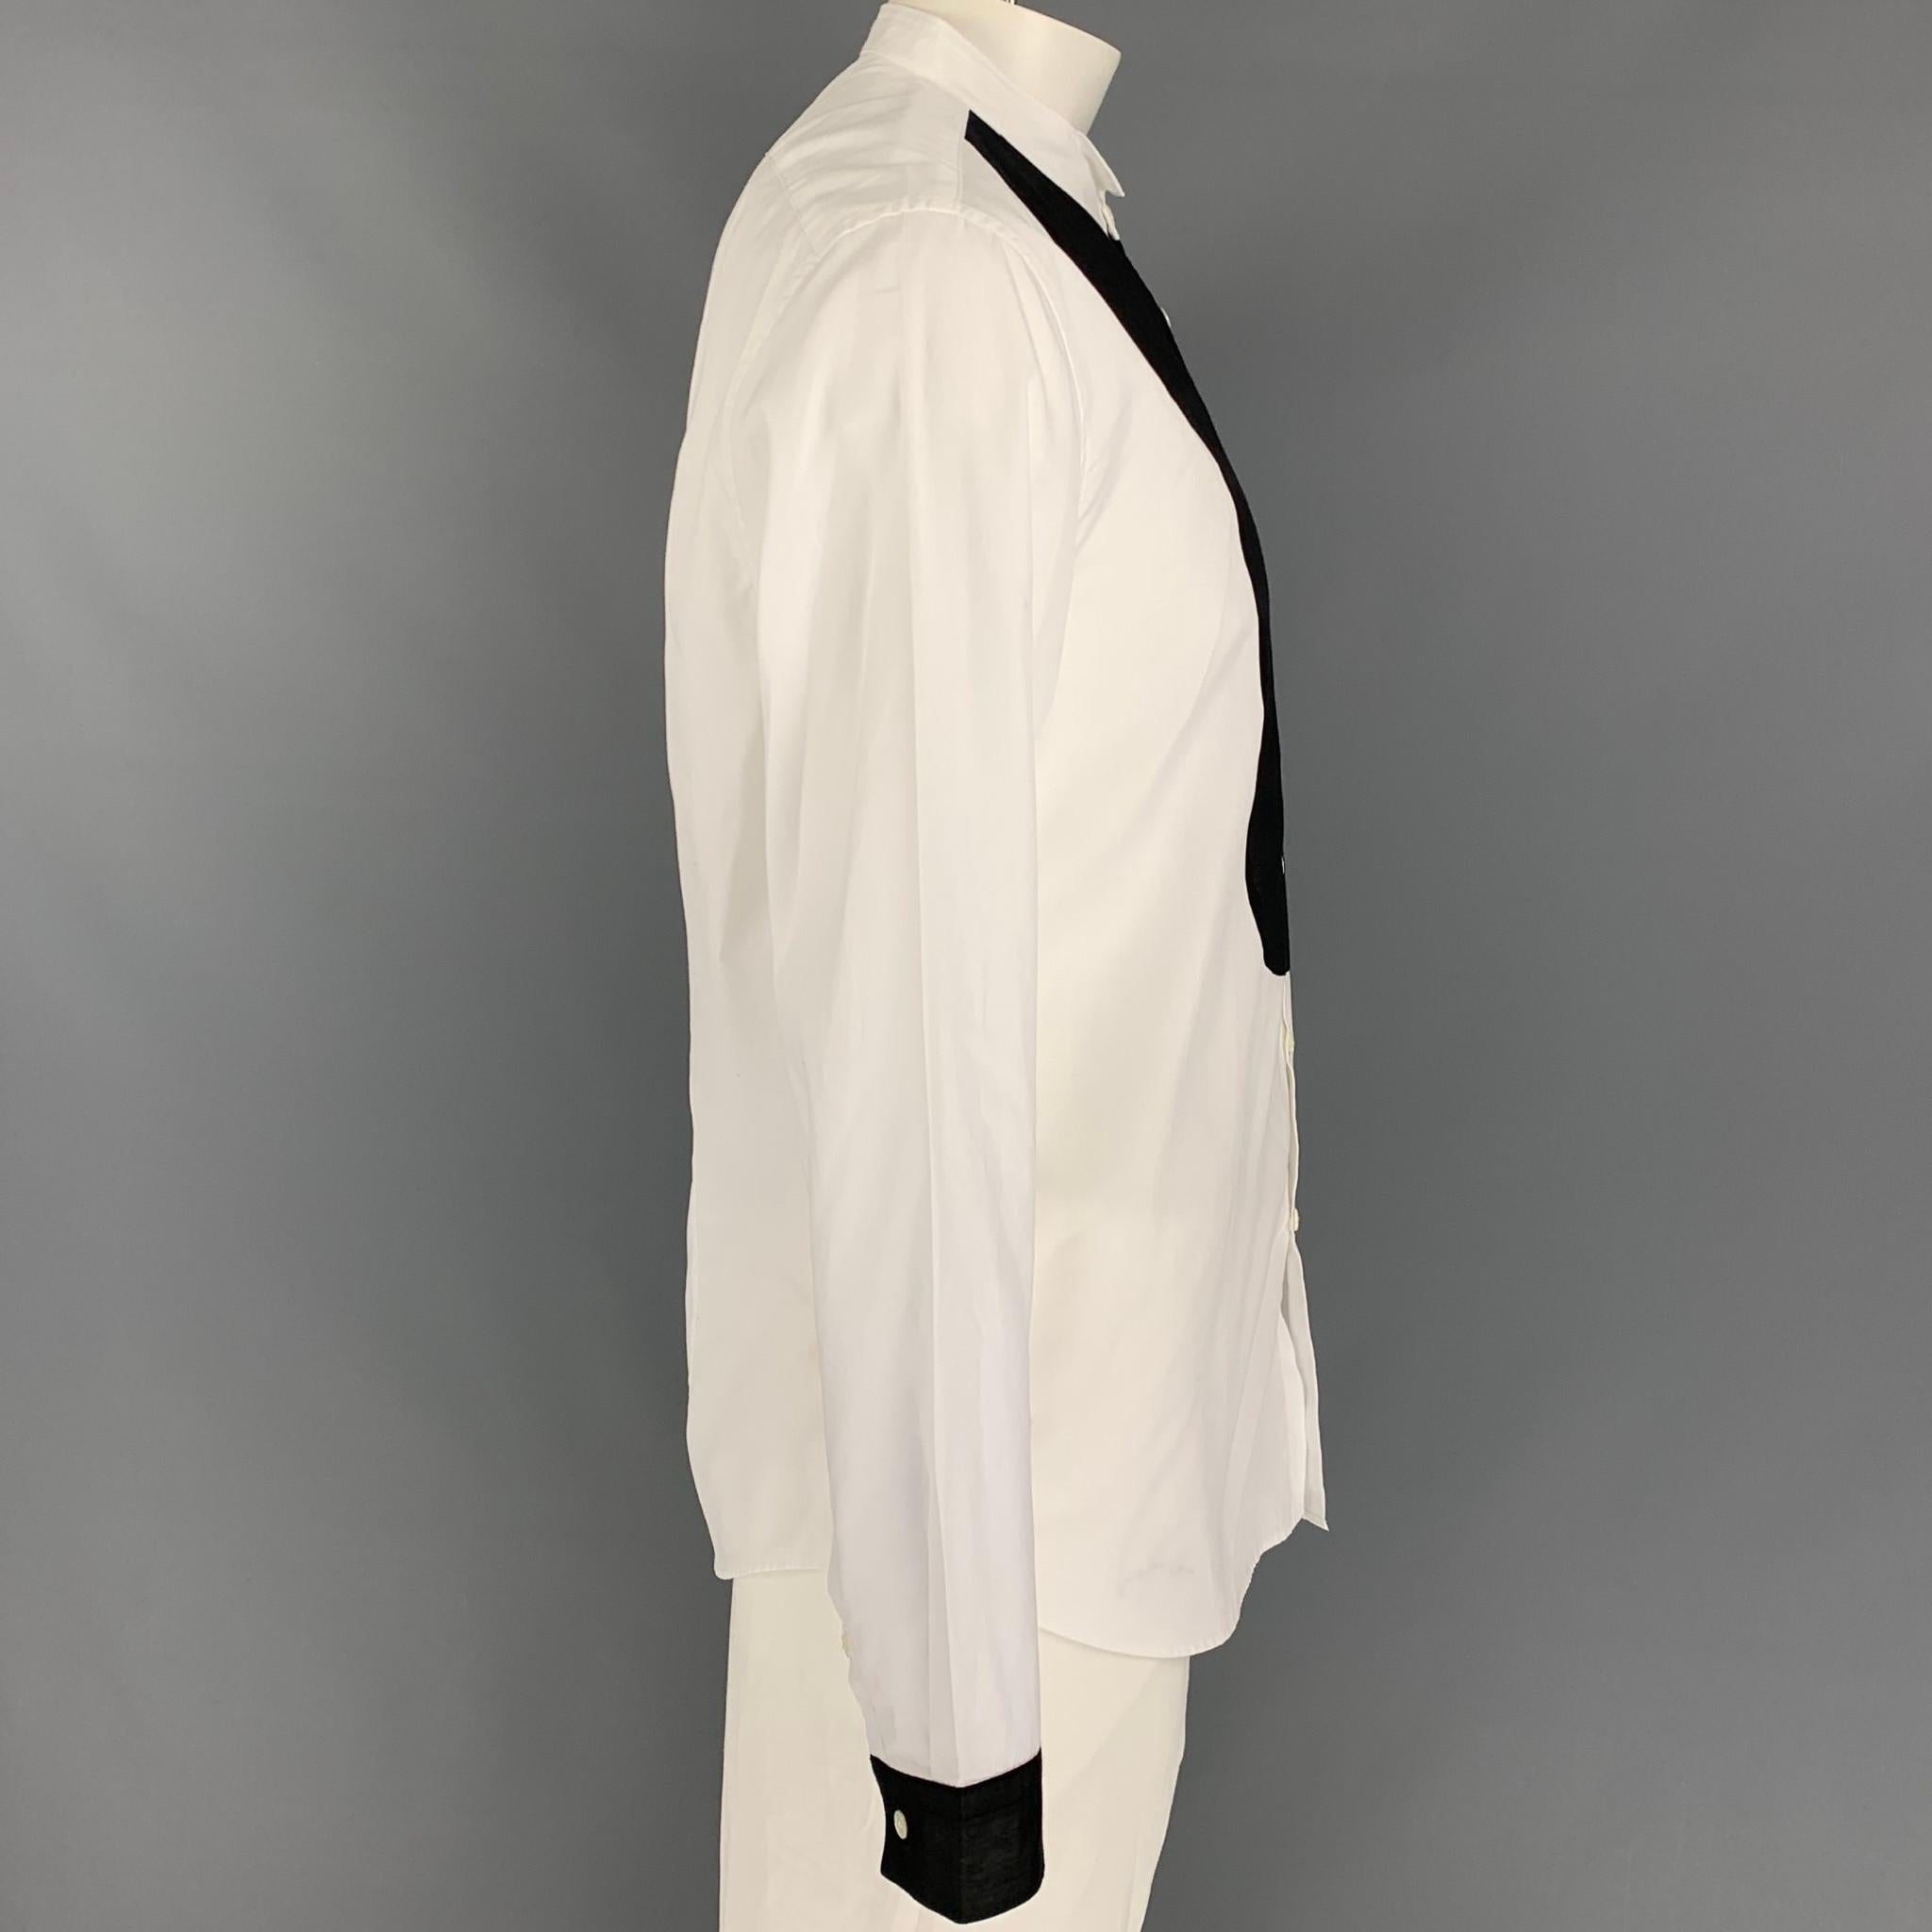 JOHN VARVATOS tuxedo long sleeve shirt comes in a white cotton featuring a black panel detail, stand up collar, and a buttoned closure. Made in Italy. 

Very Good Pre-Owned Condition.
Marked: XL

Measurements:

Shoulder: 19.5 in.
Chest: 44